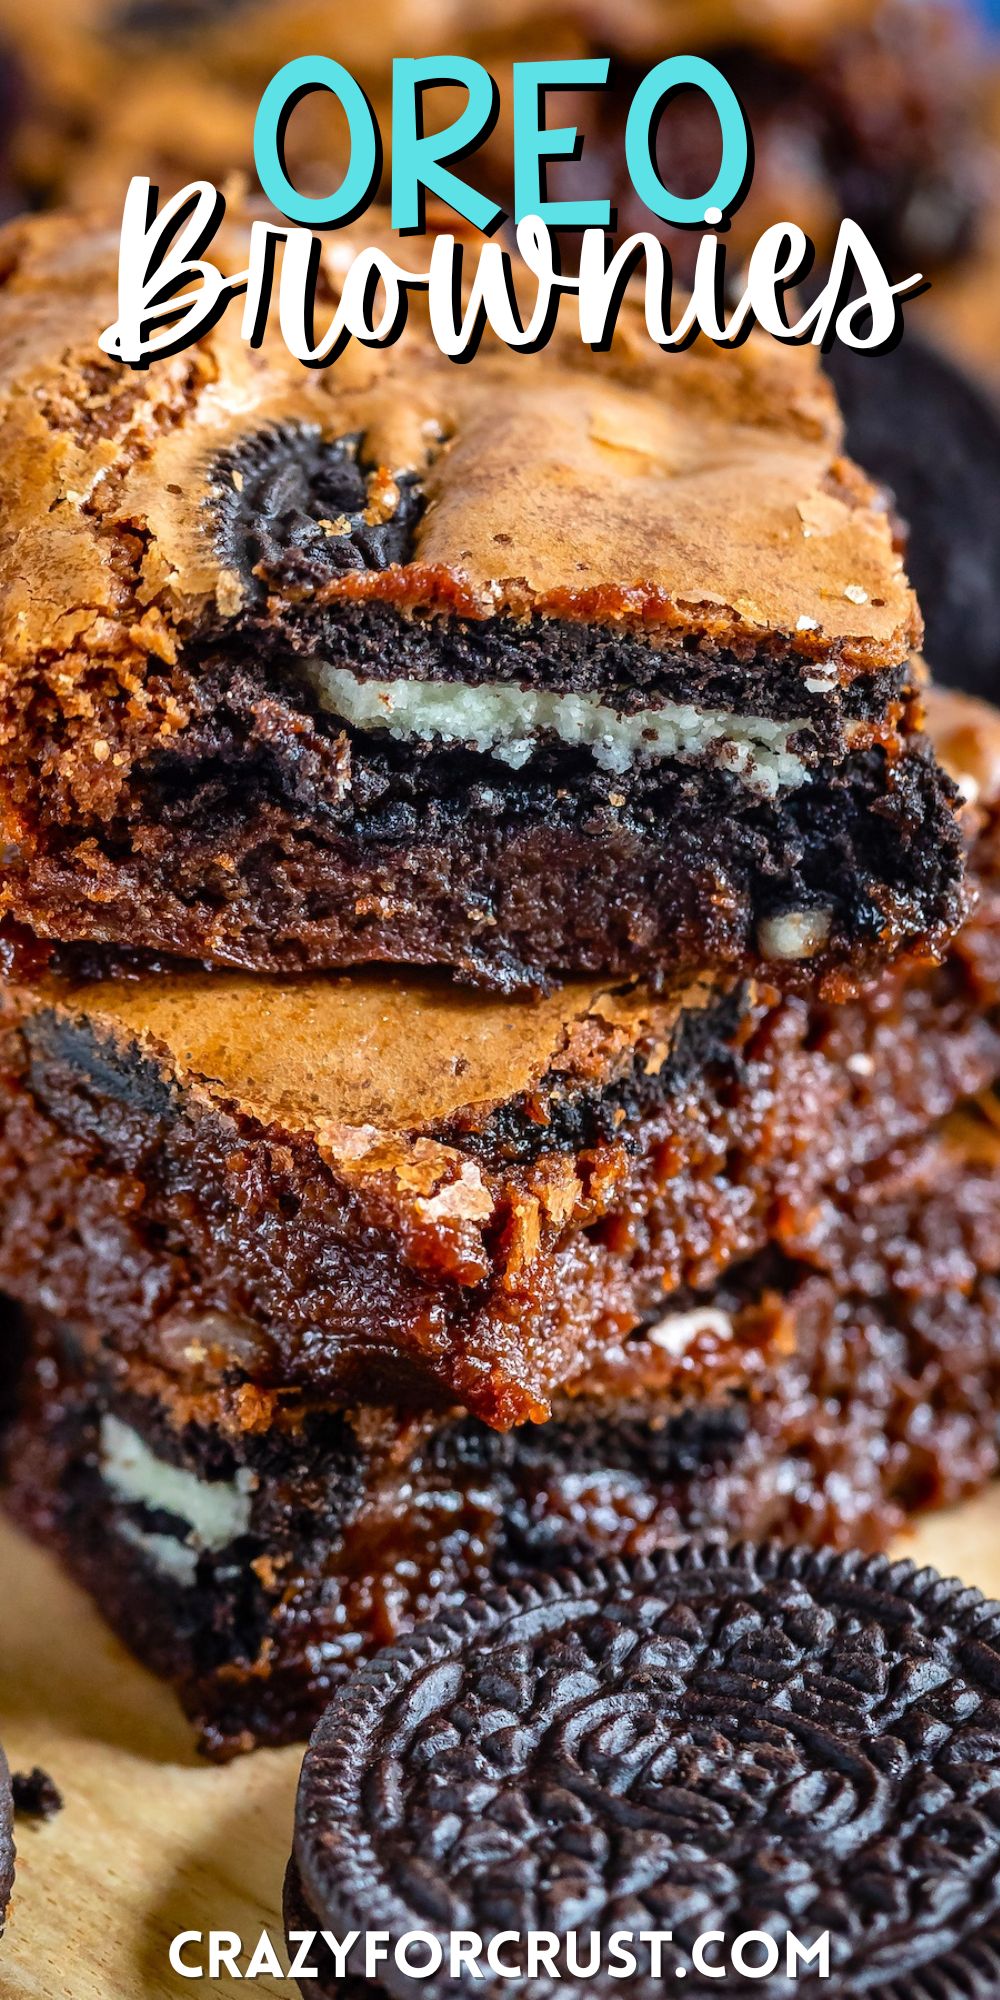 stacked oreo brownies on a cutting board with words on the image.